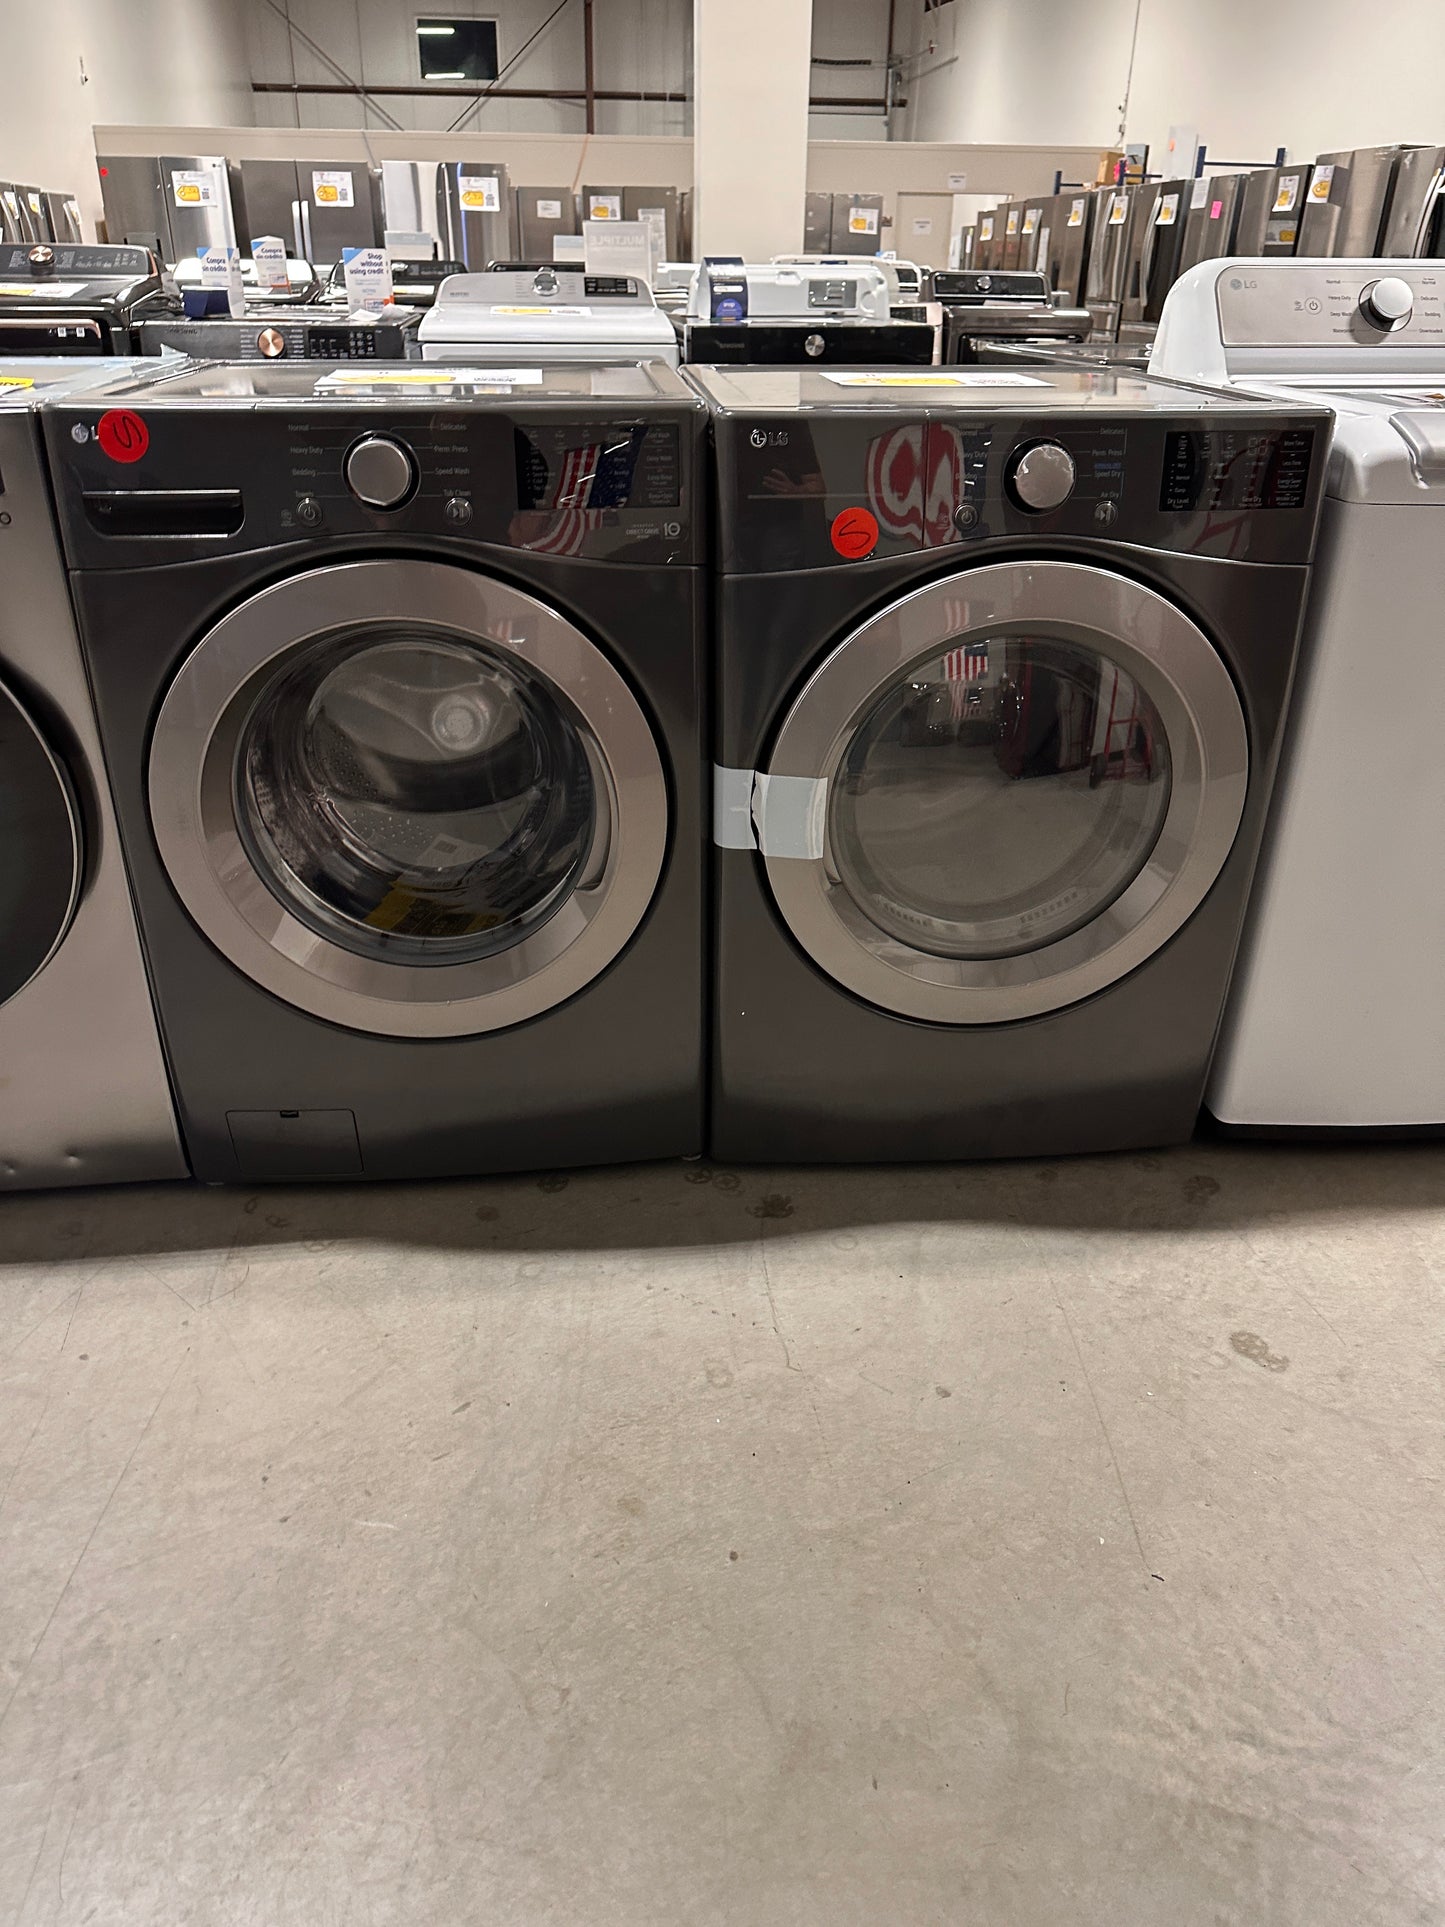 BRAND NEW LG LAUNDRY SET - FRONT LOAD WASHER ELECTRIC DRYER - WAS13206 DRY11950S